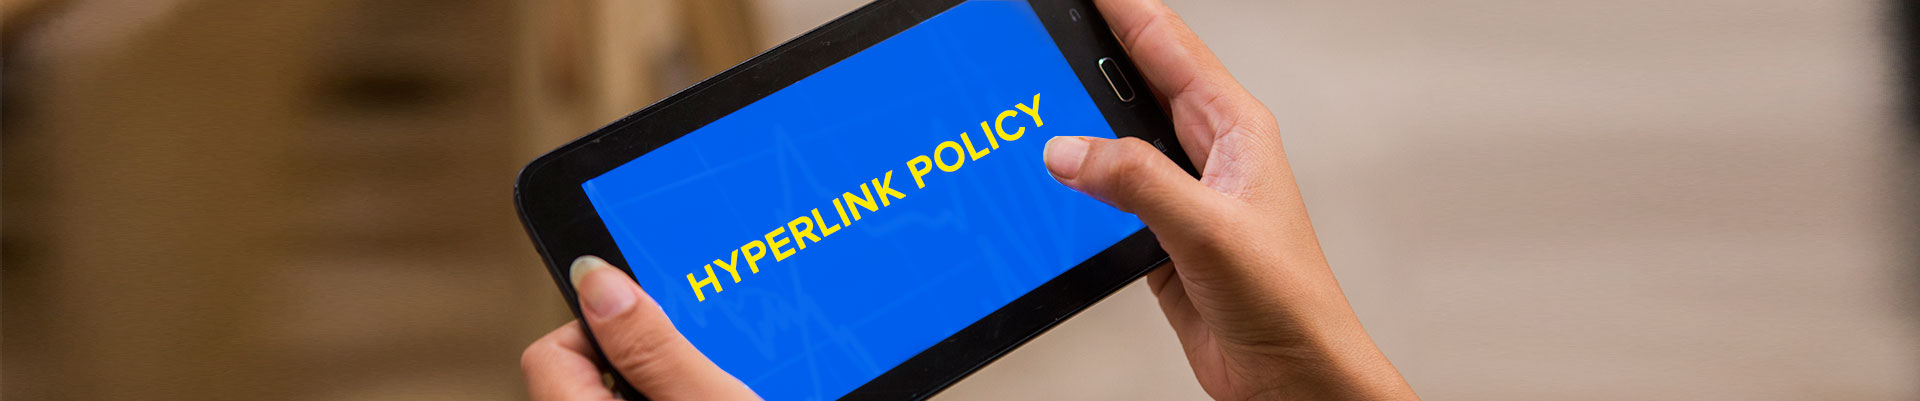 HYPERLINK POLICY